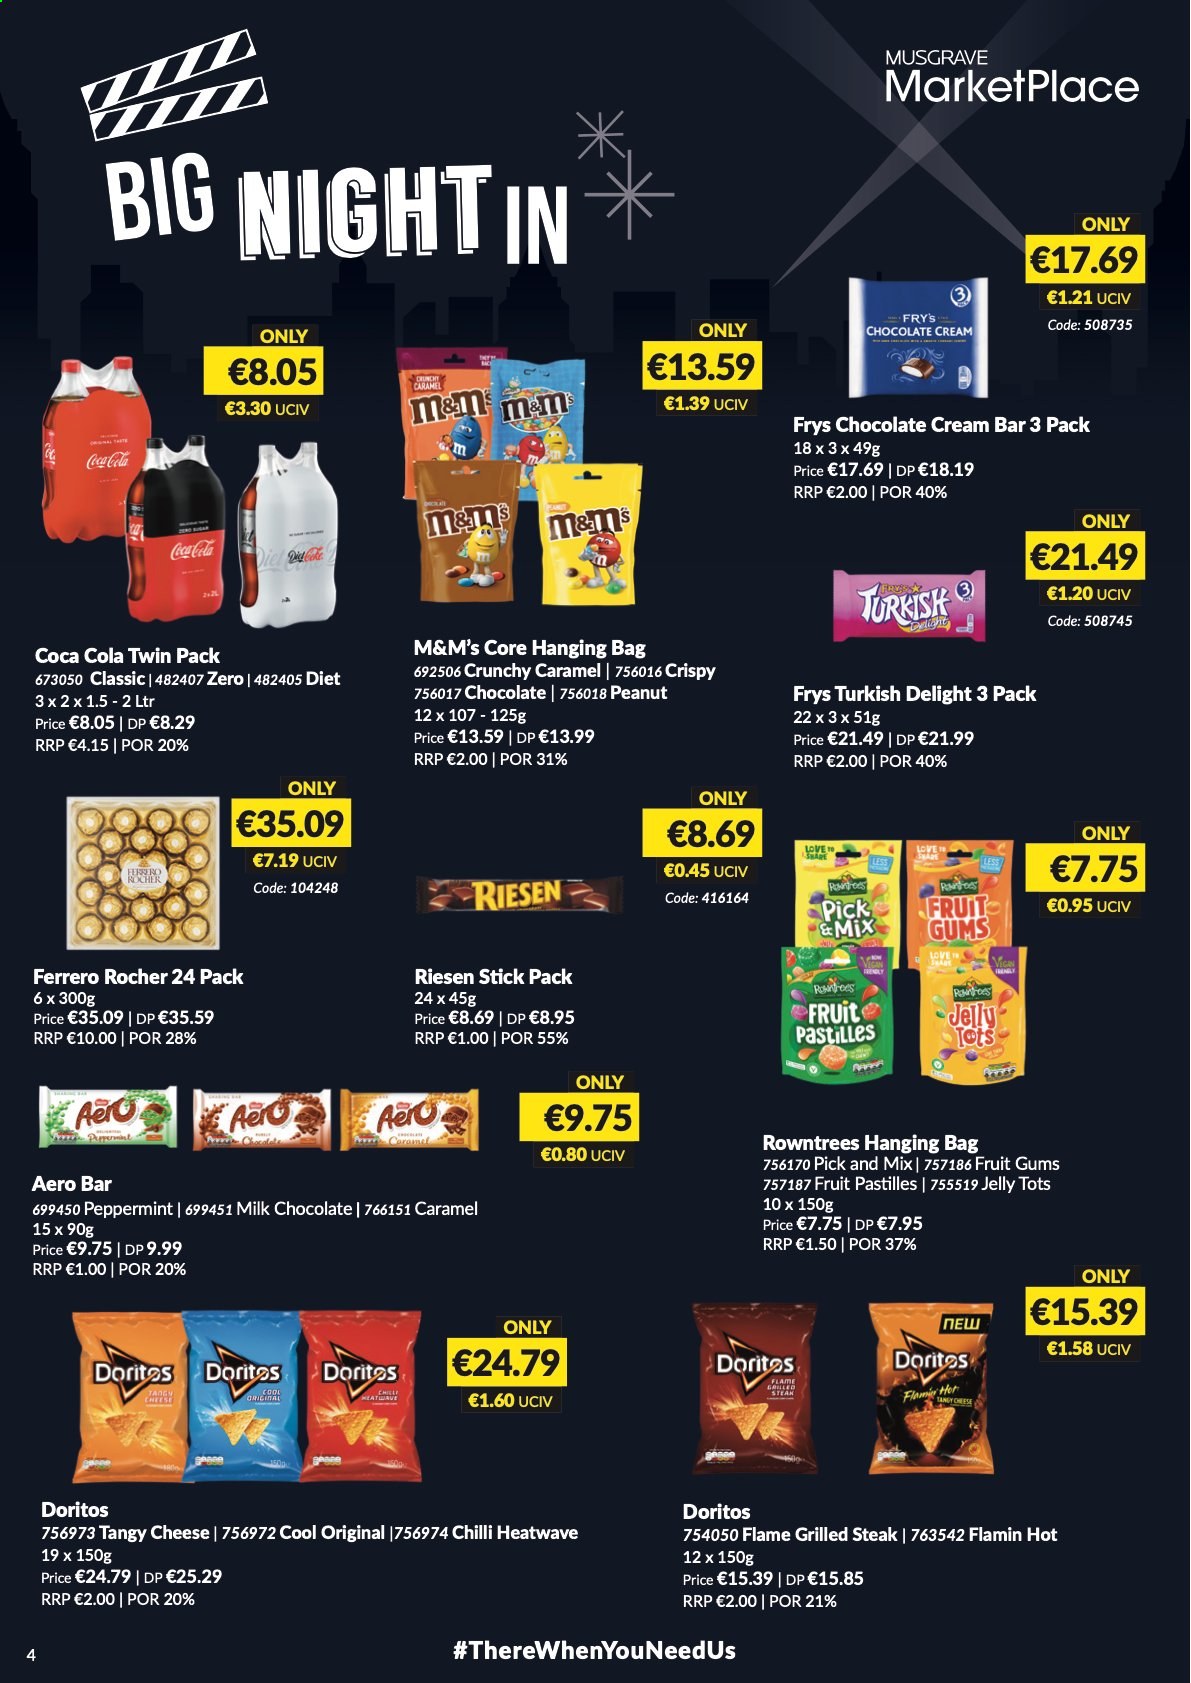 thumbnail - MUSGRAVE Market Place offer  - 14.03.2021 - 10.04.2021 - Sales products - cheese, jelly, milk chocolate, Ferrero Rocher, M&M's, pastilles, Doritos, caramel, peanuts, Coca-Cola, steak. Page 4.